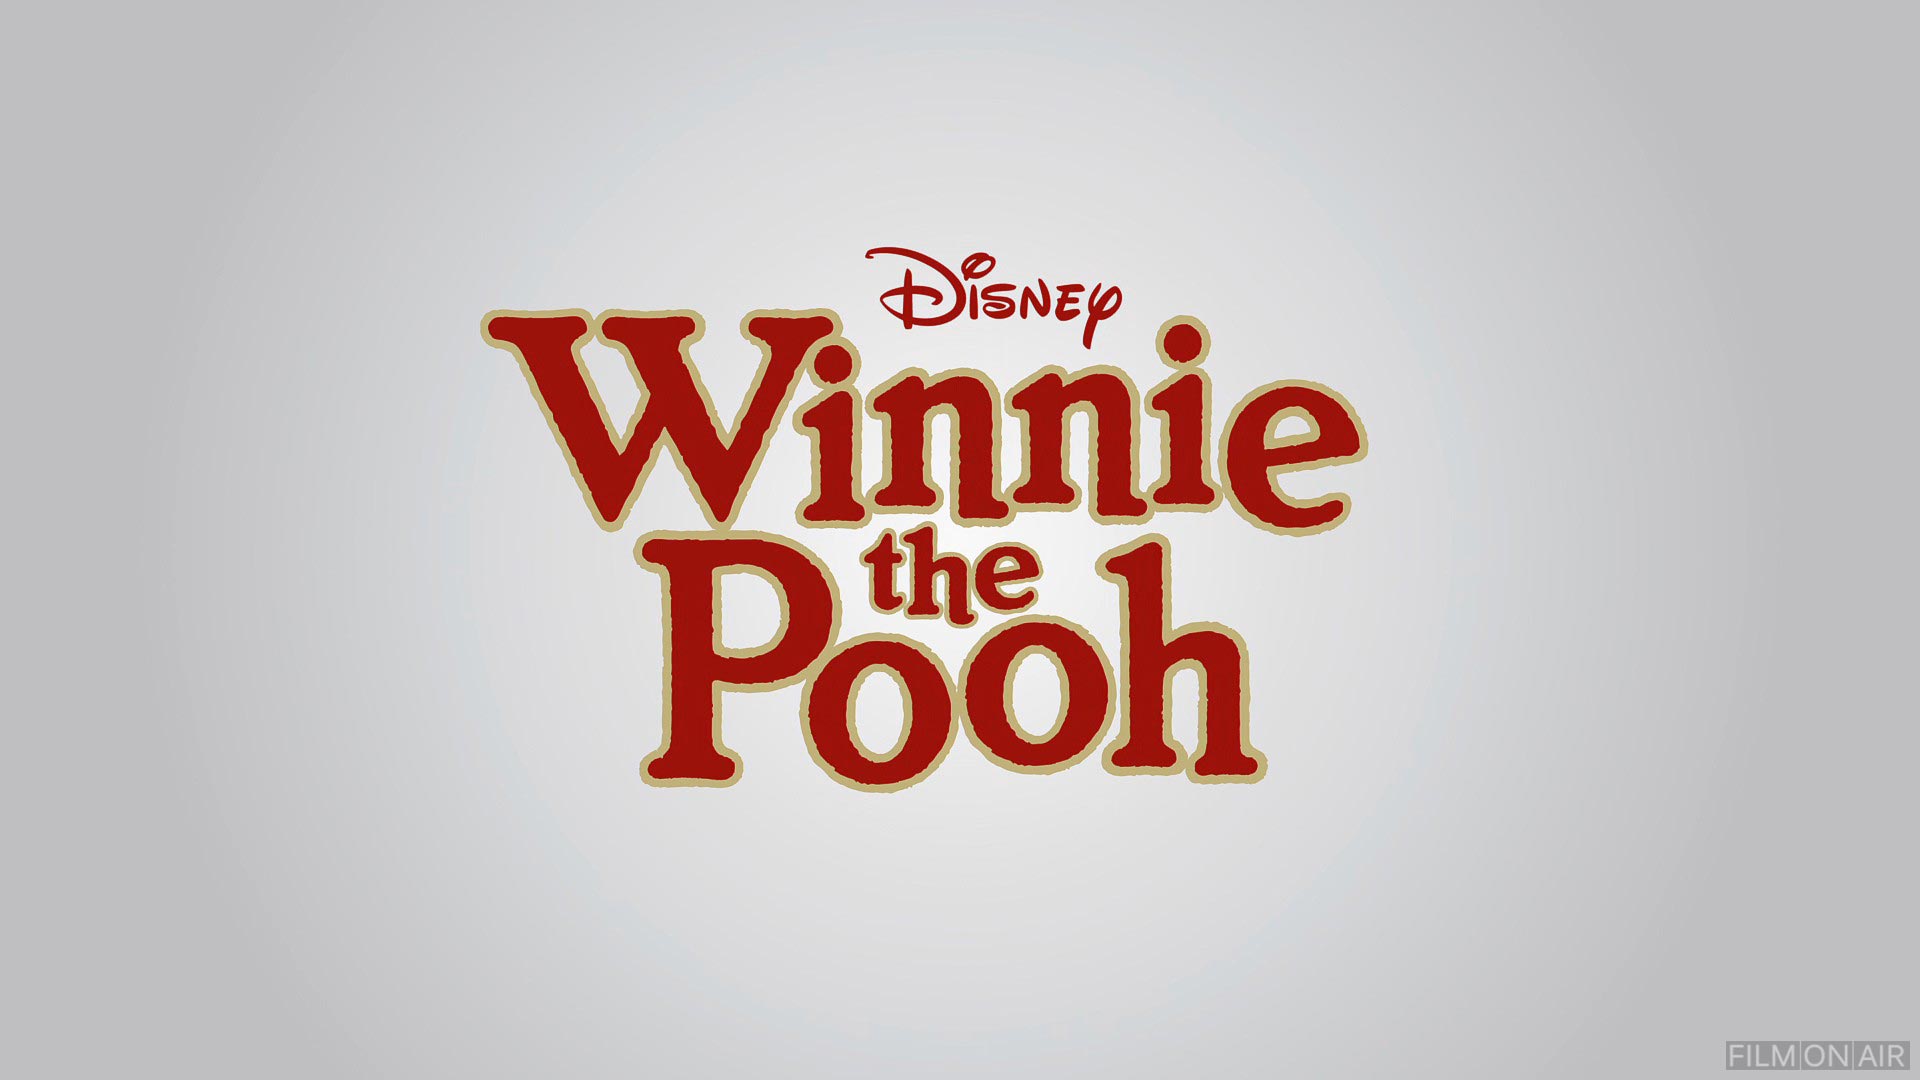 Winnie The Pooh Logo
 in Winnie the Pooh in Winnie the Pooh